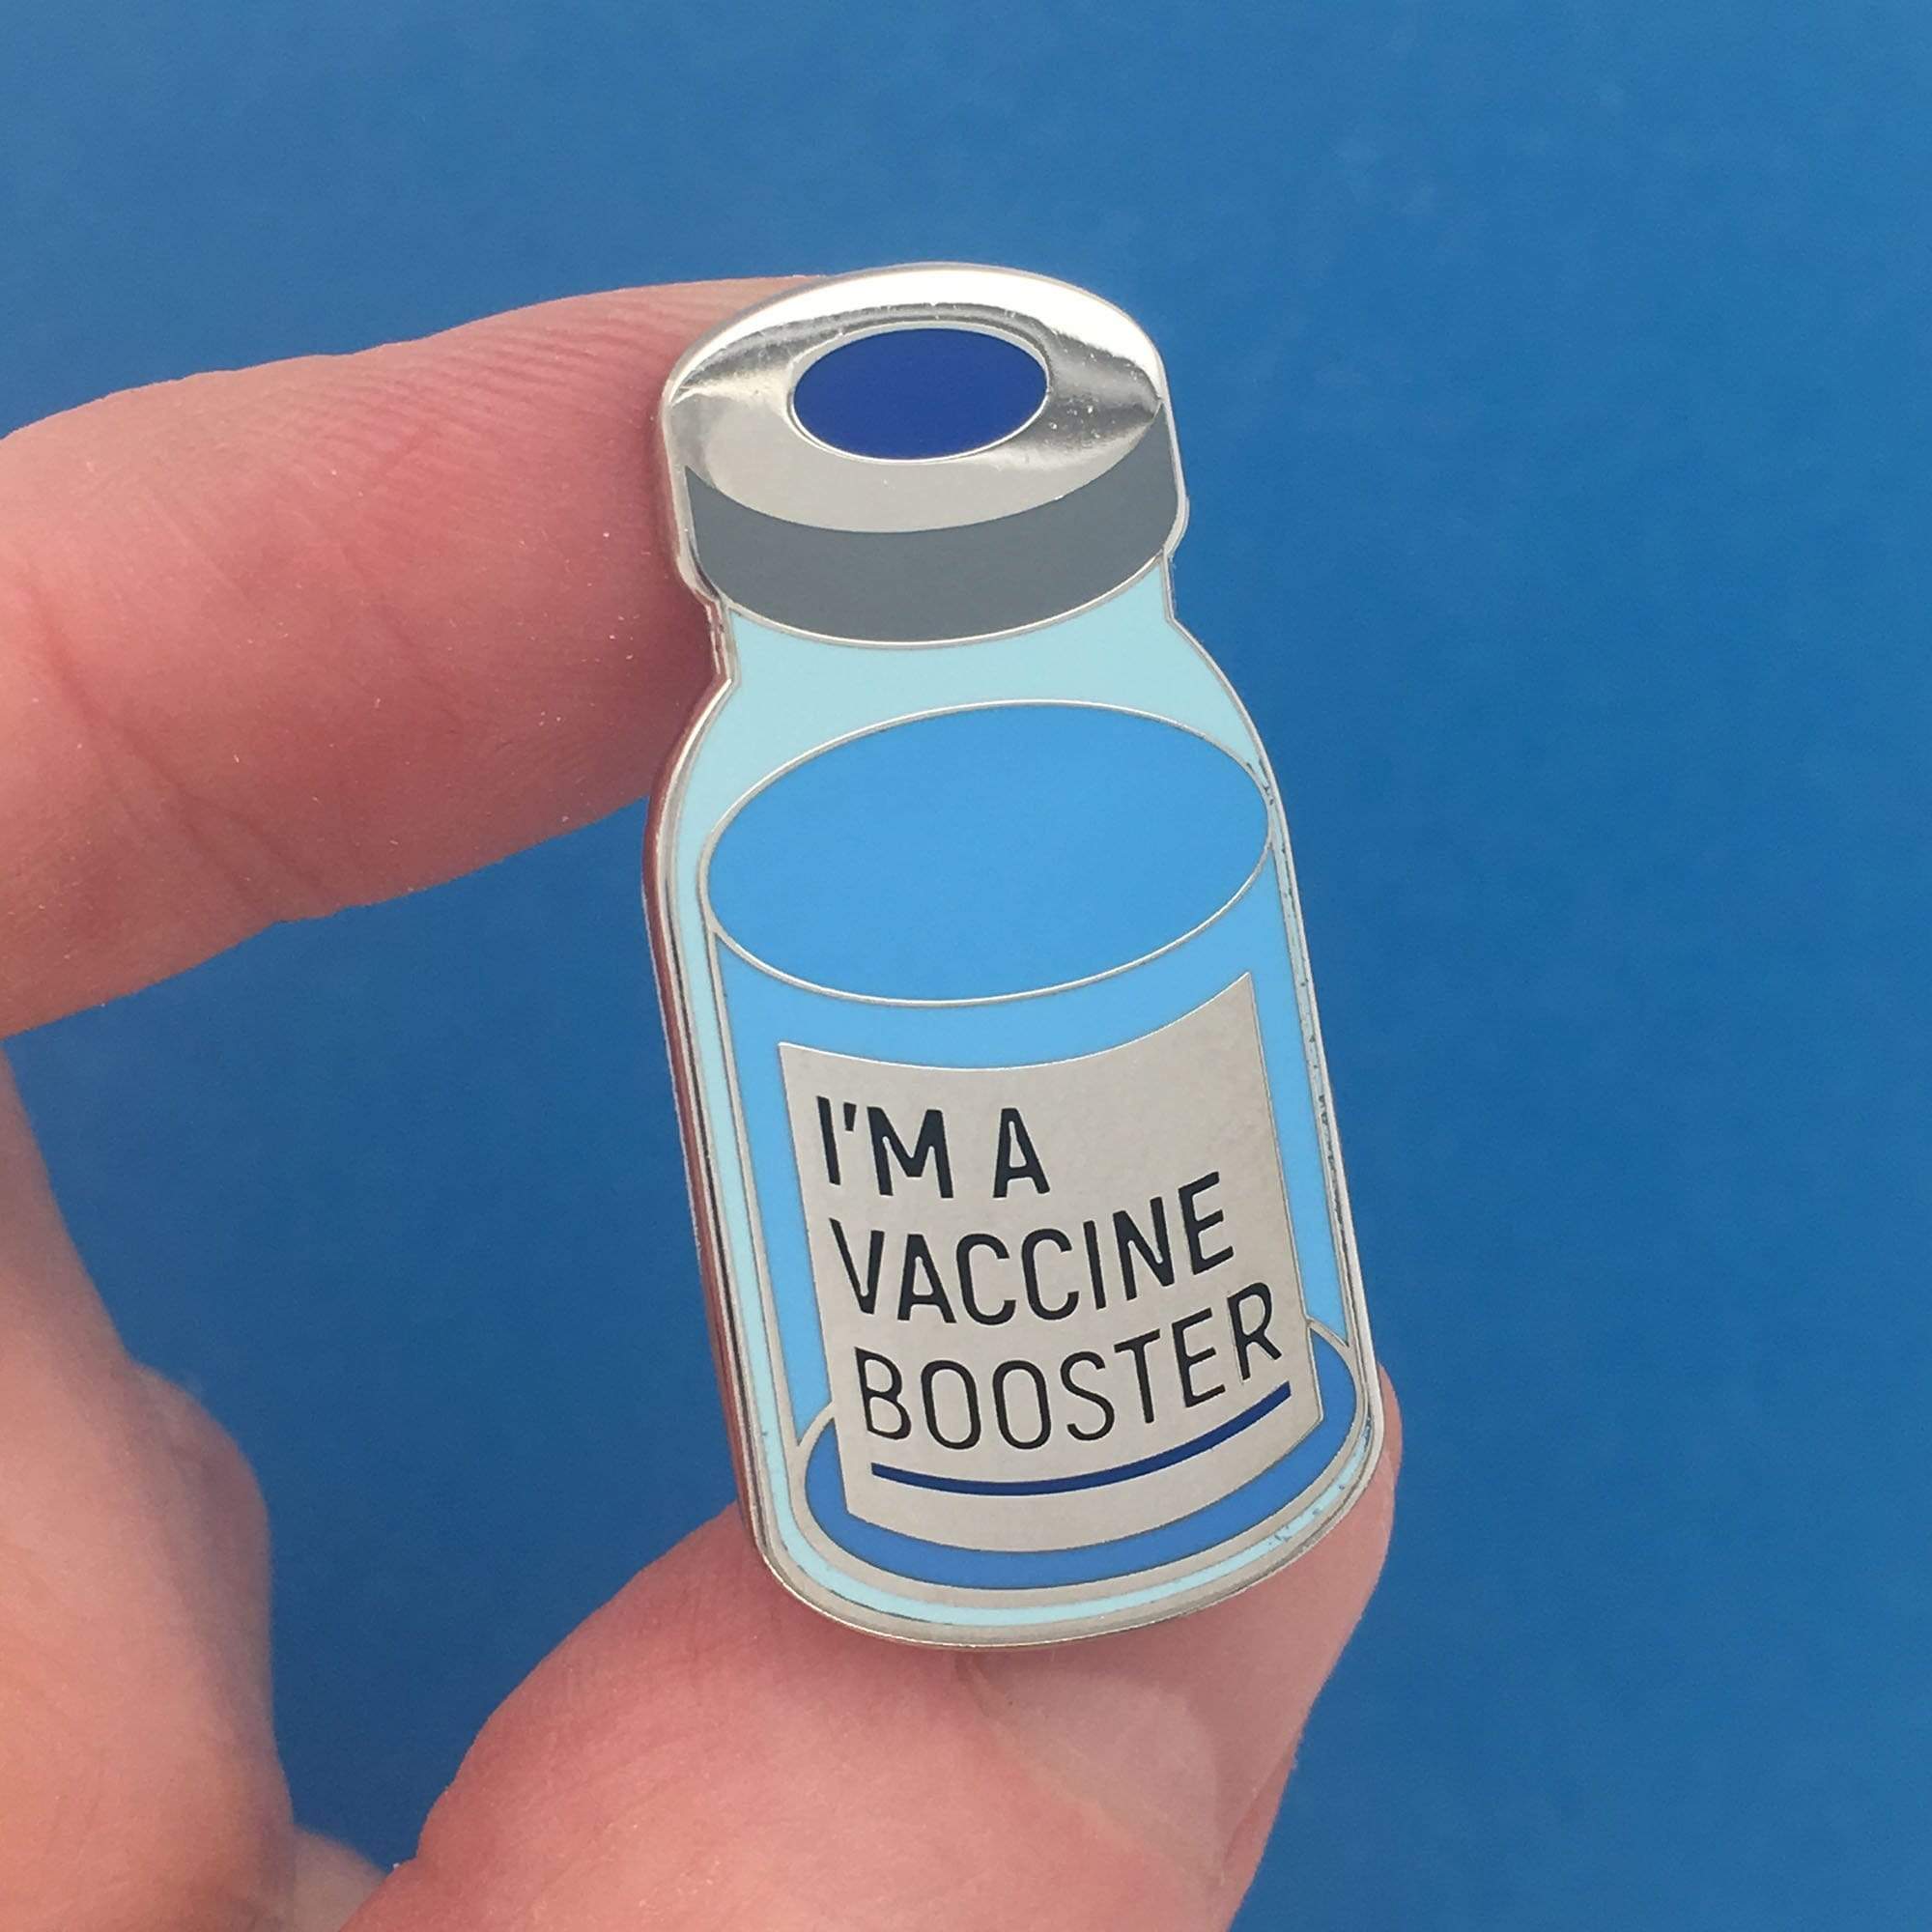 I'm a Vaccine Booster - Vial Pin